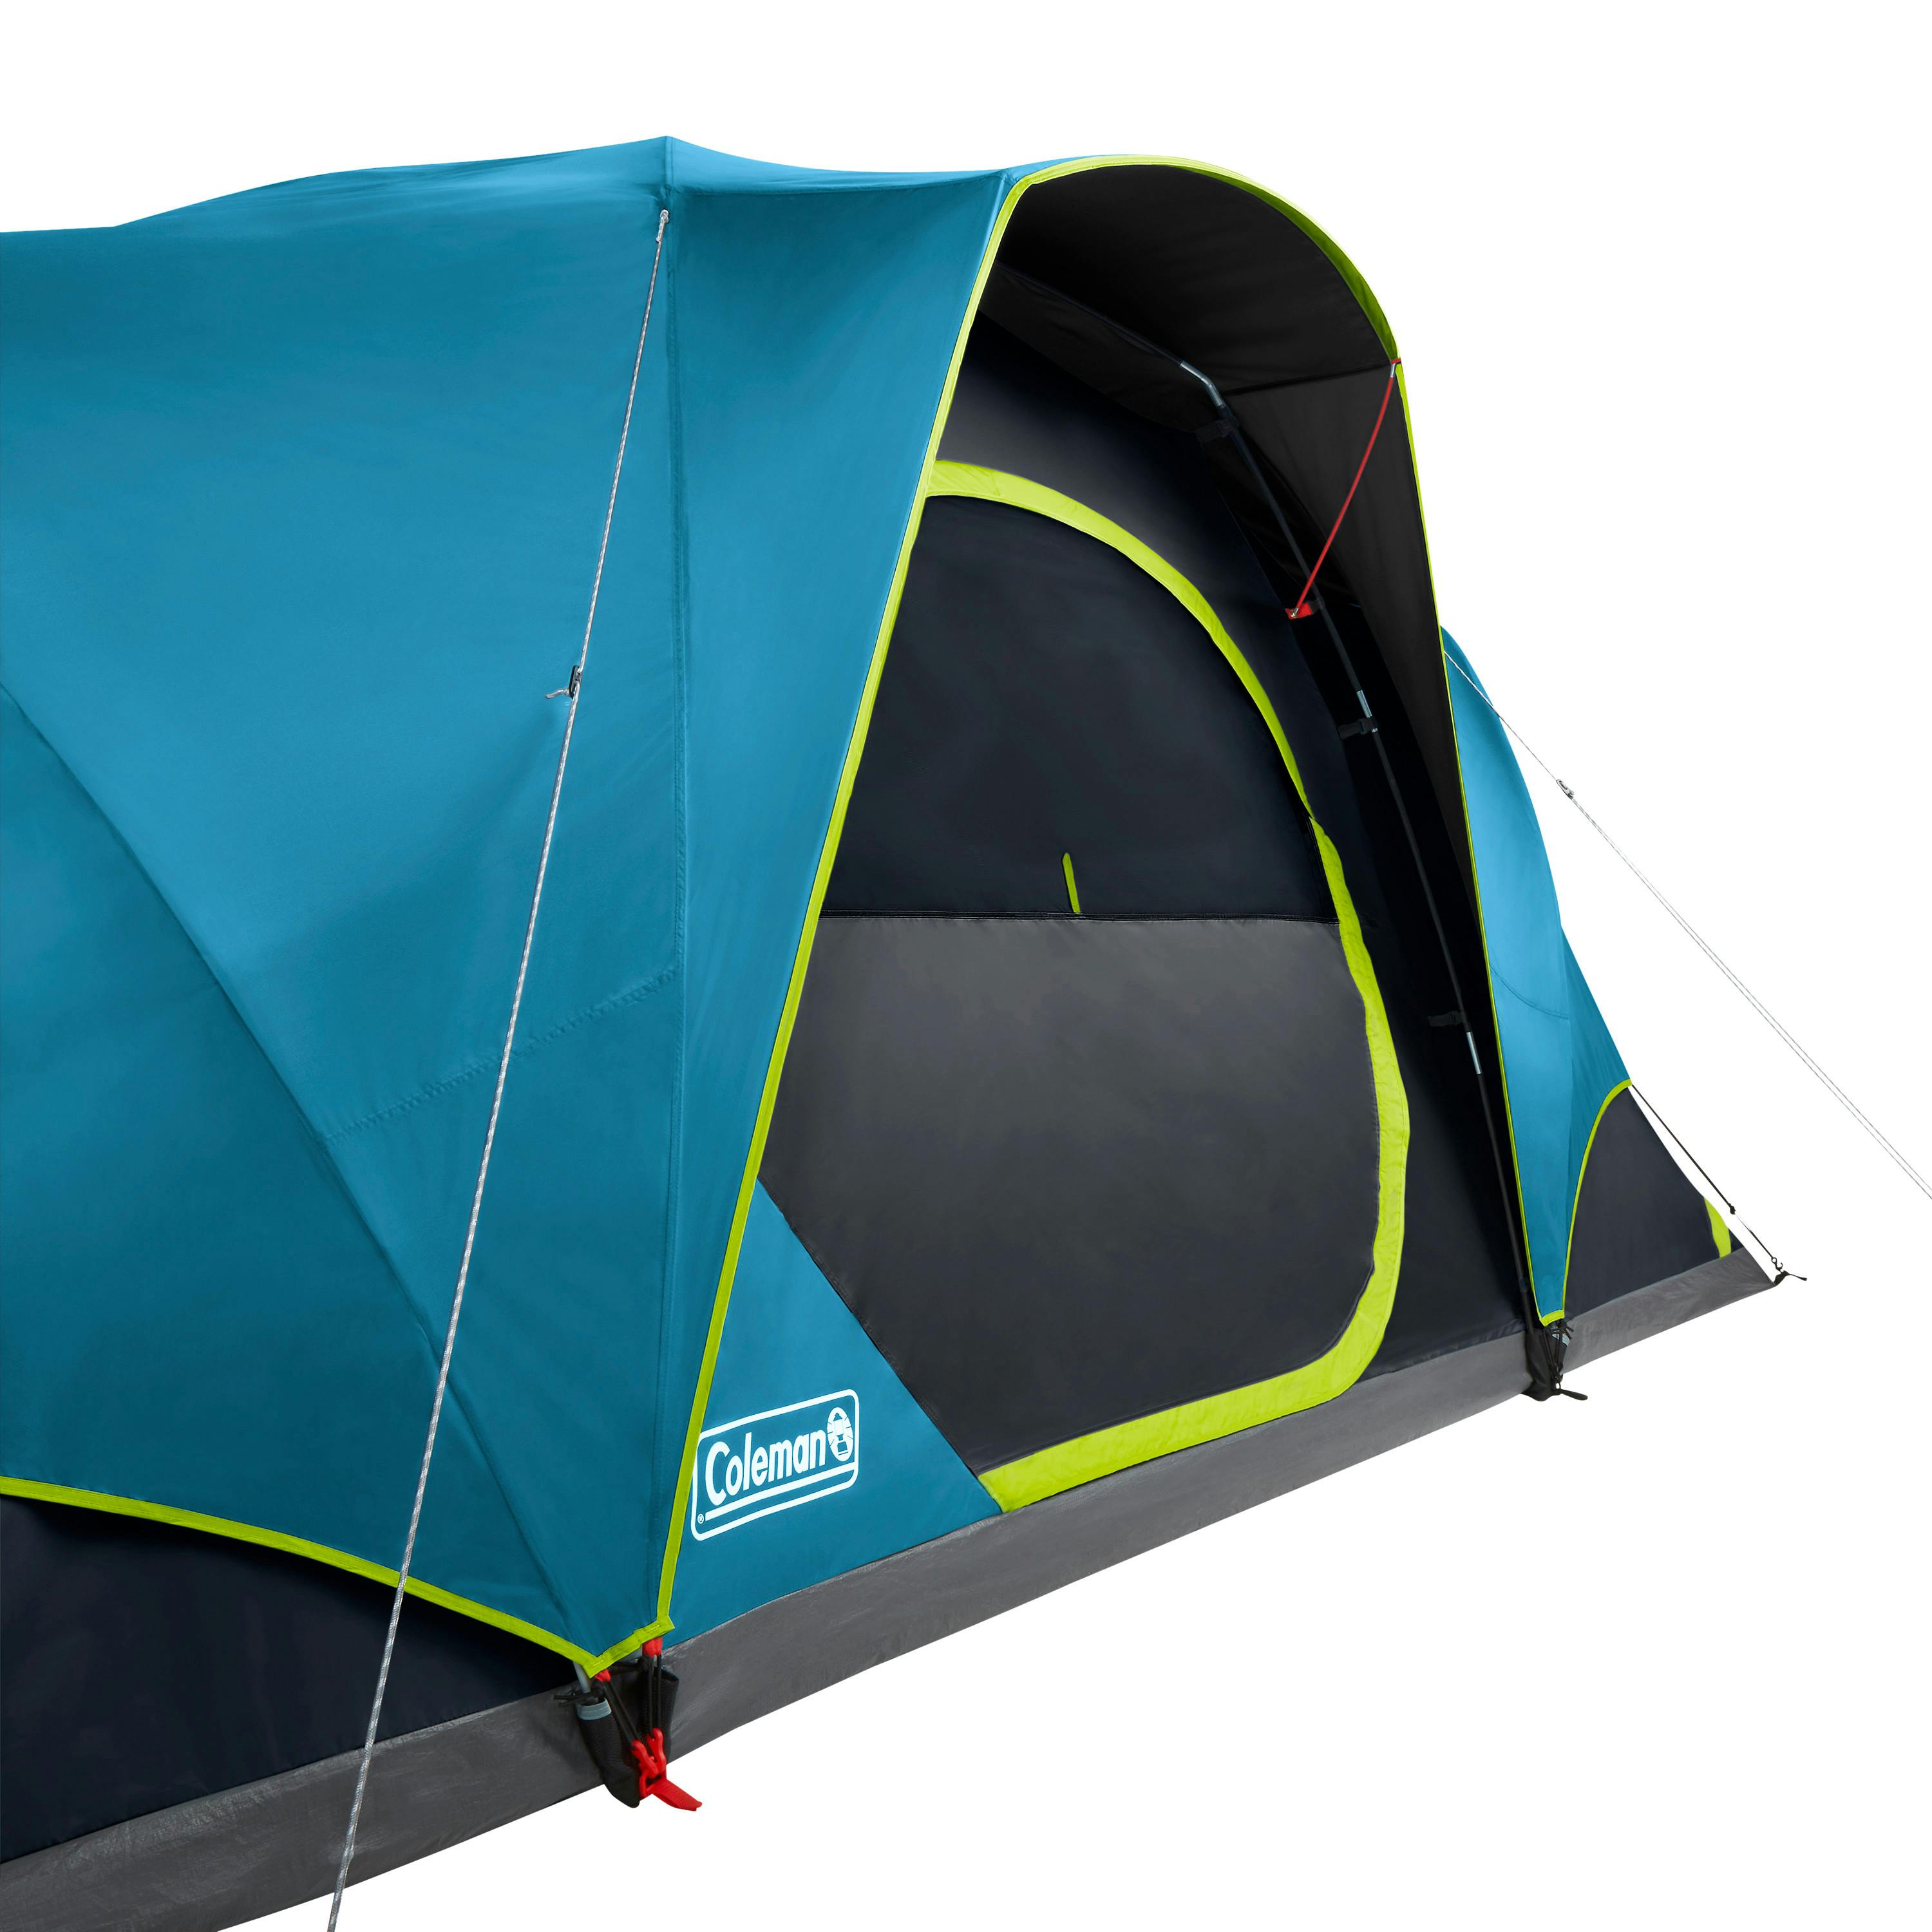 Coleman Skydome™ XL 10 Person Camping Tent with Dark Room Technology